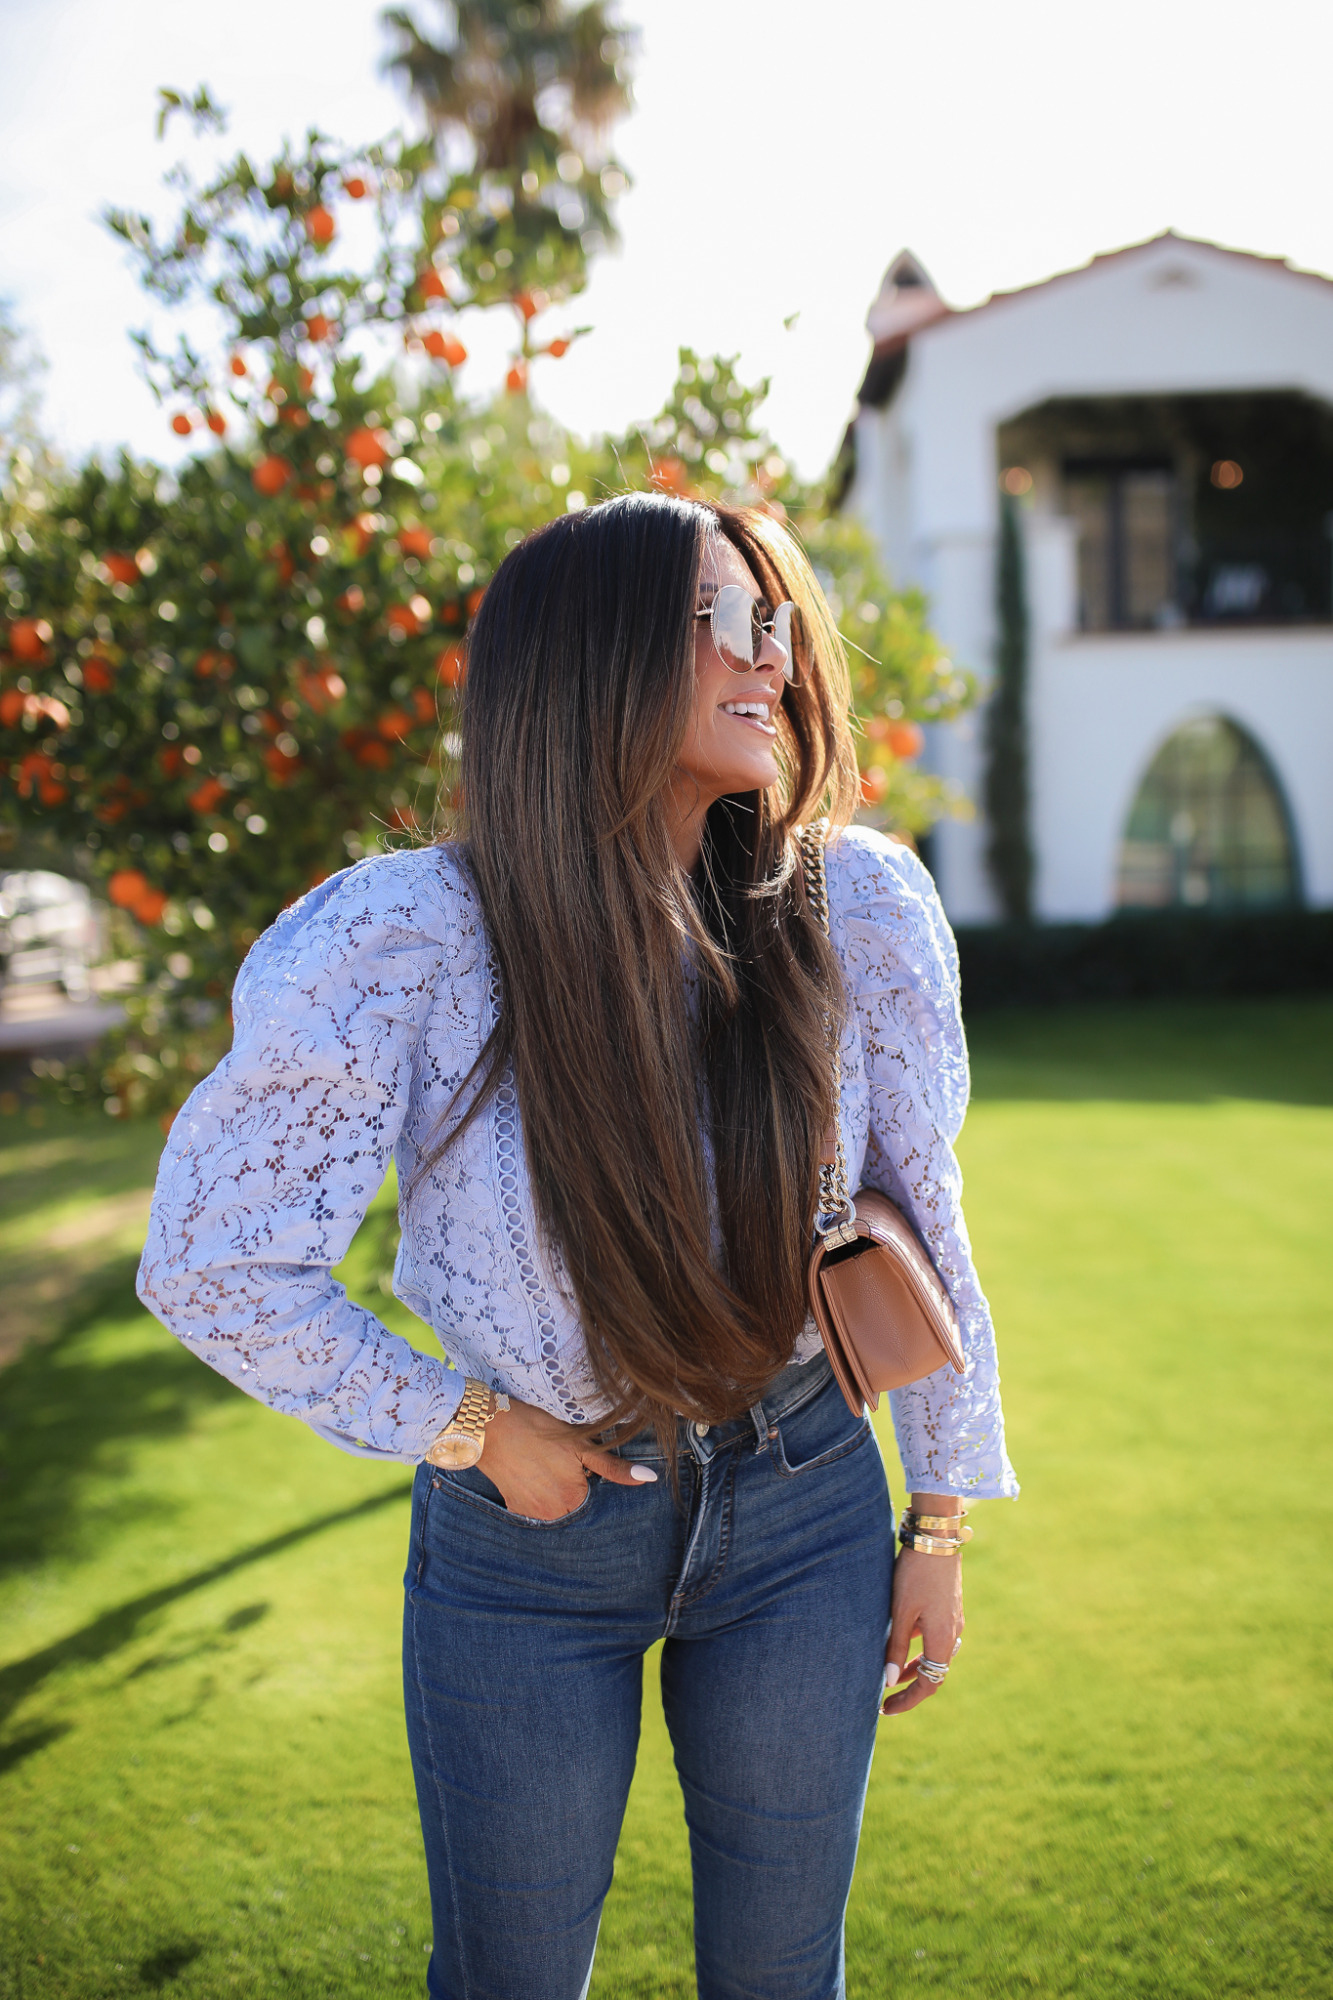 Express Flared Jeans styled for Spring by top US fashion blogger, Emily Gemma of The Sweetest Thing.